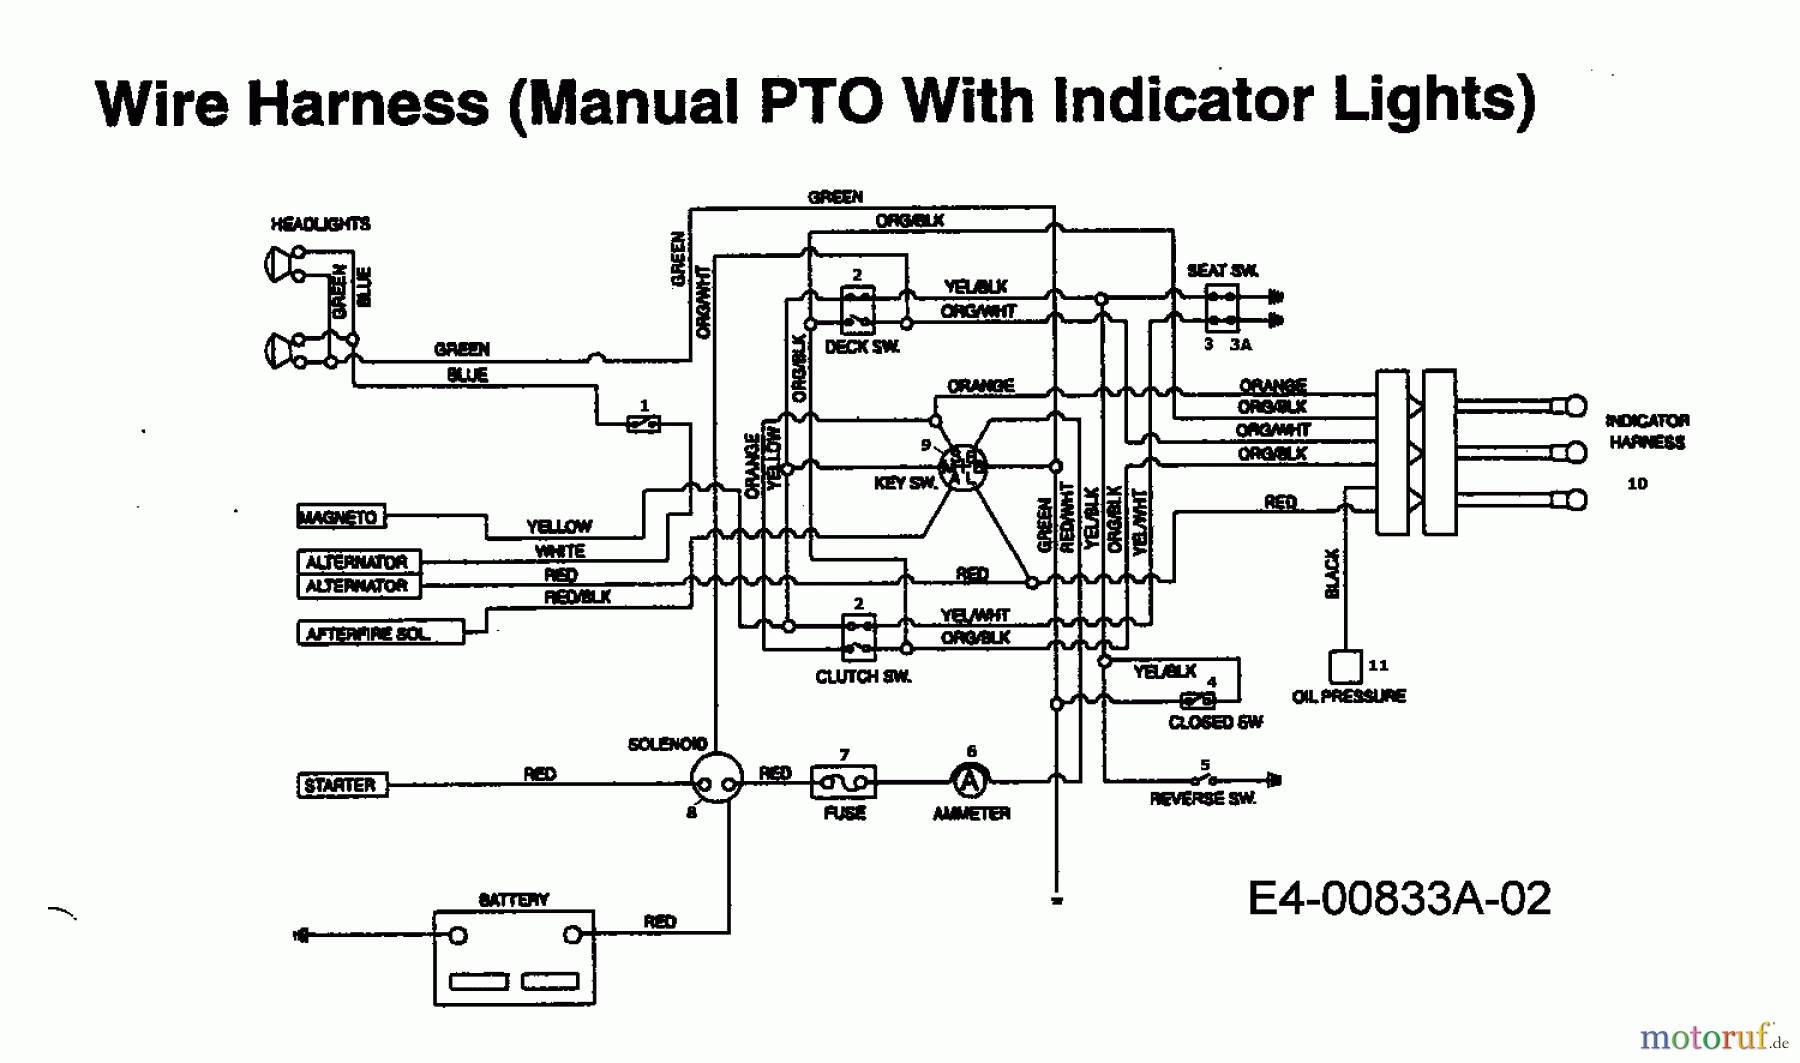  Raiffeisen Lawn tractors RMH 15/102 H 13AD793N628  (1997) Wiring diagram with indicator lights